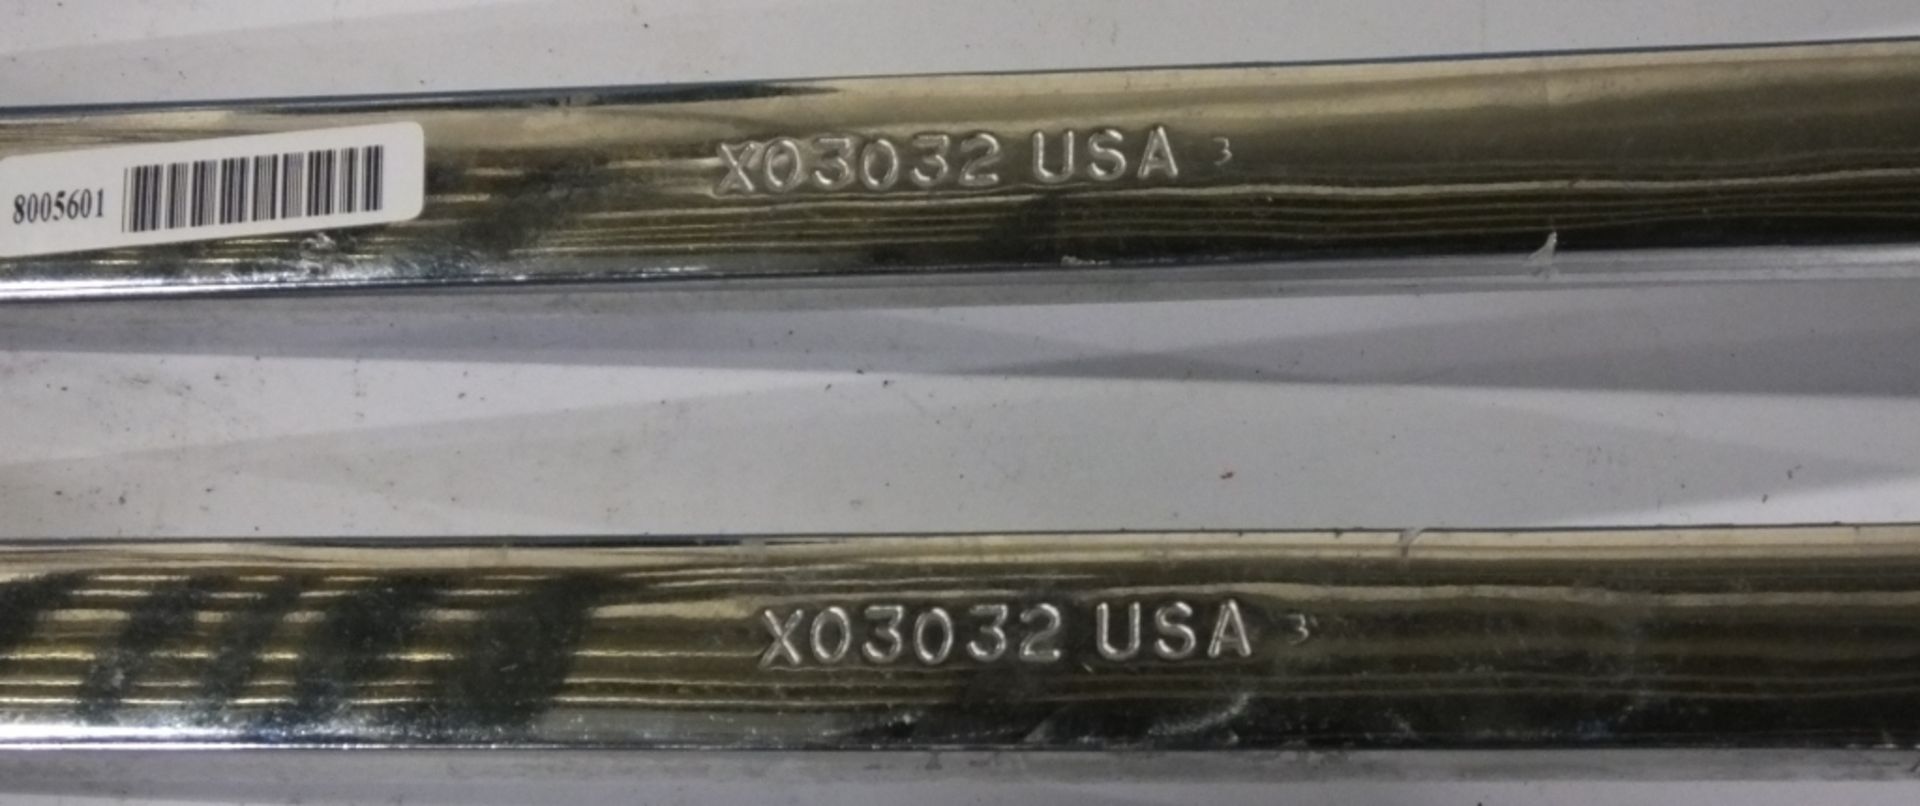 2x Snap-On ring spanners - 15/16 - Image 3 of 3